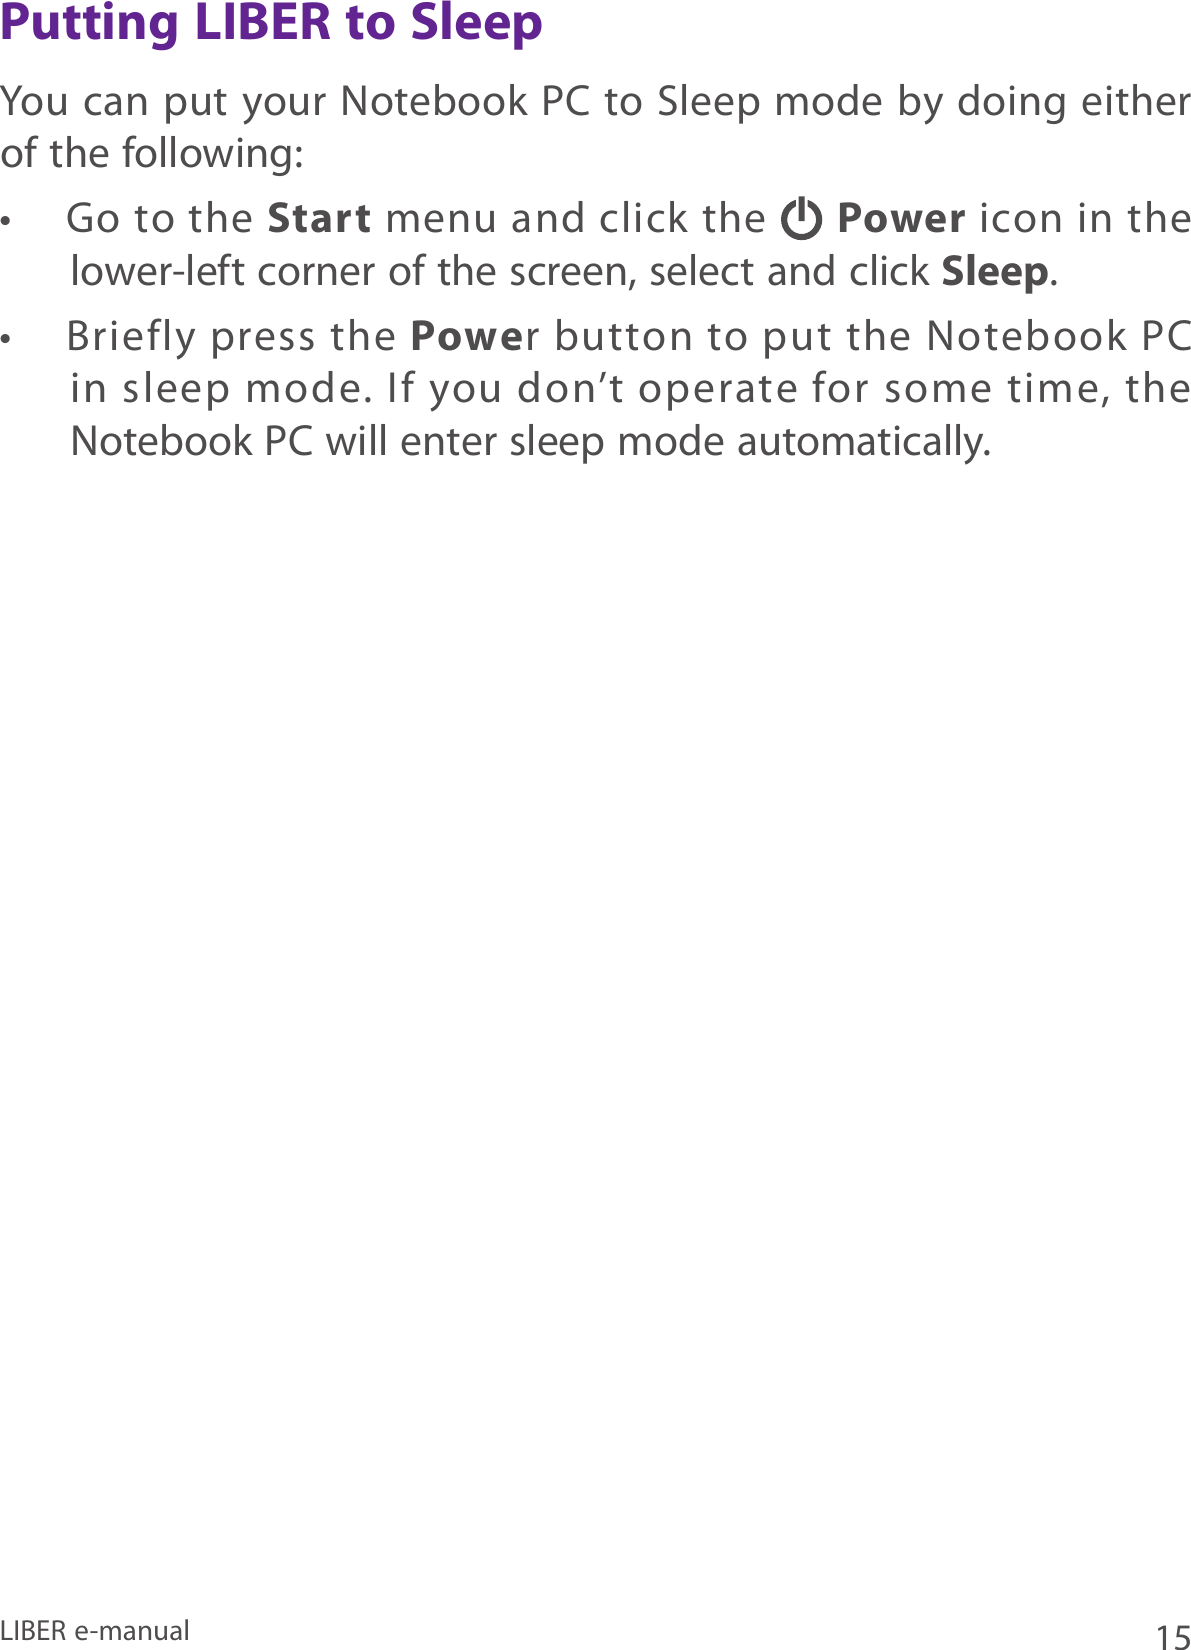 15LIBER e-manualPutting LIBER to SleepYou can put your Notebook PC to Sleep  mode by doing either of the following:•  Go to the Start menu and click the   Power icon in the lower-left corner of the screen, select and click Sleep.•  Briefly press the Power  button  to put  the Notebook PC in sleep mode. If you don’t operate for some time, the Notebook PC will enter sleep mode automatically. 